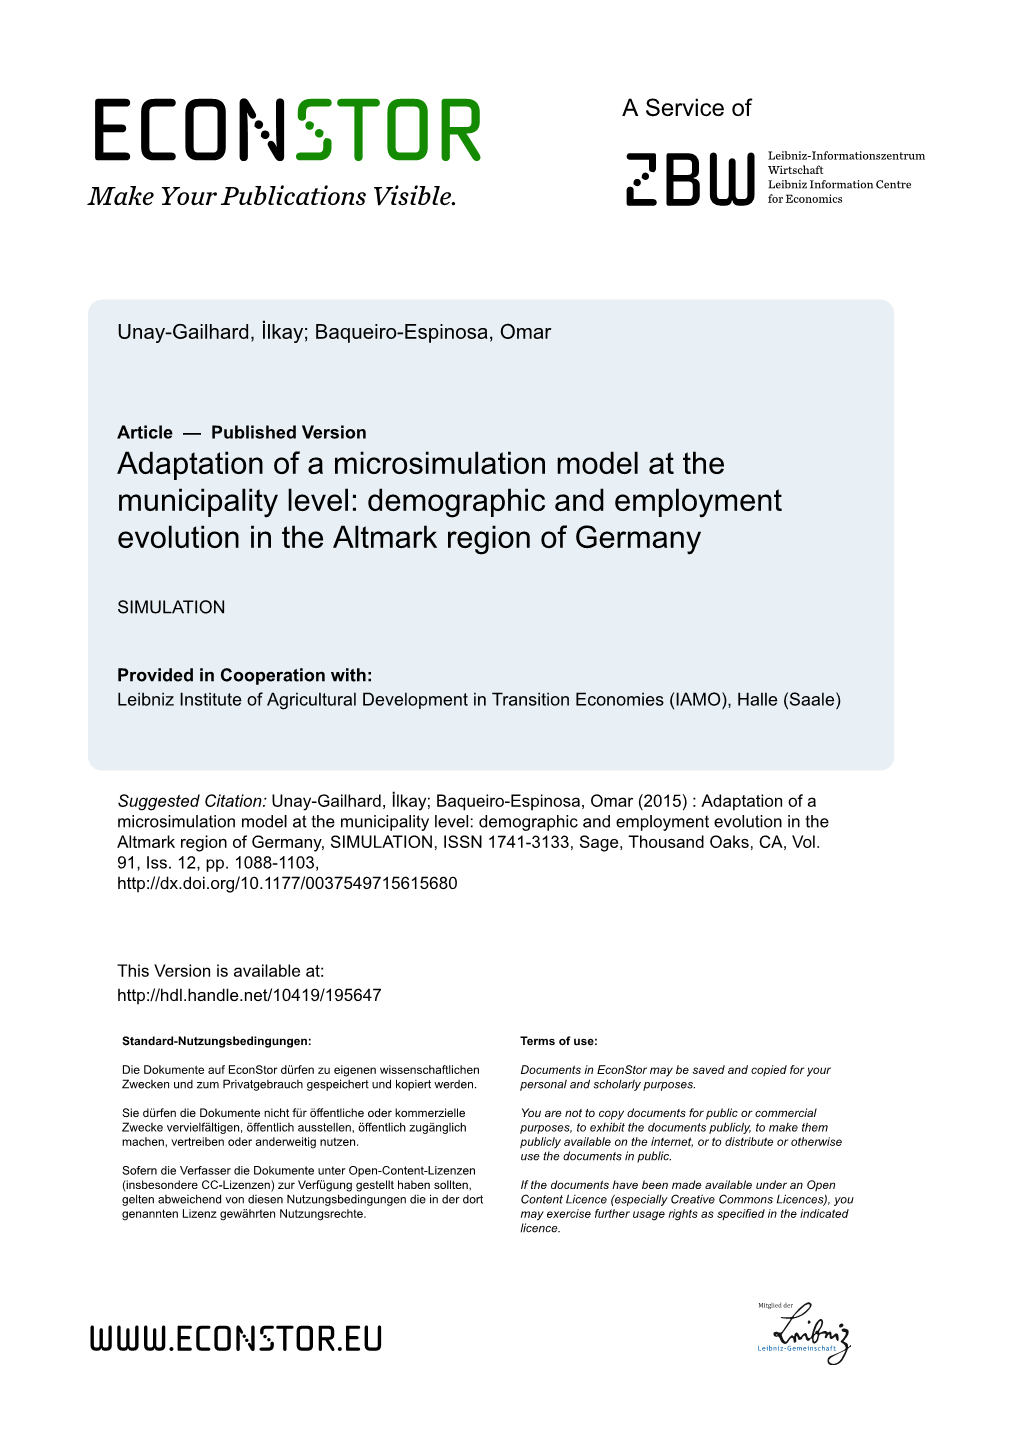 Adaptation of a Microsimulation Model at the Municipality Level: Demographic and Employment Evolution in the Altmark Region of Germany